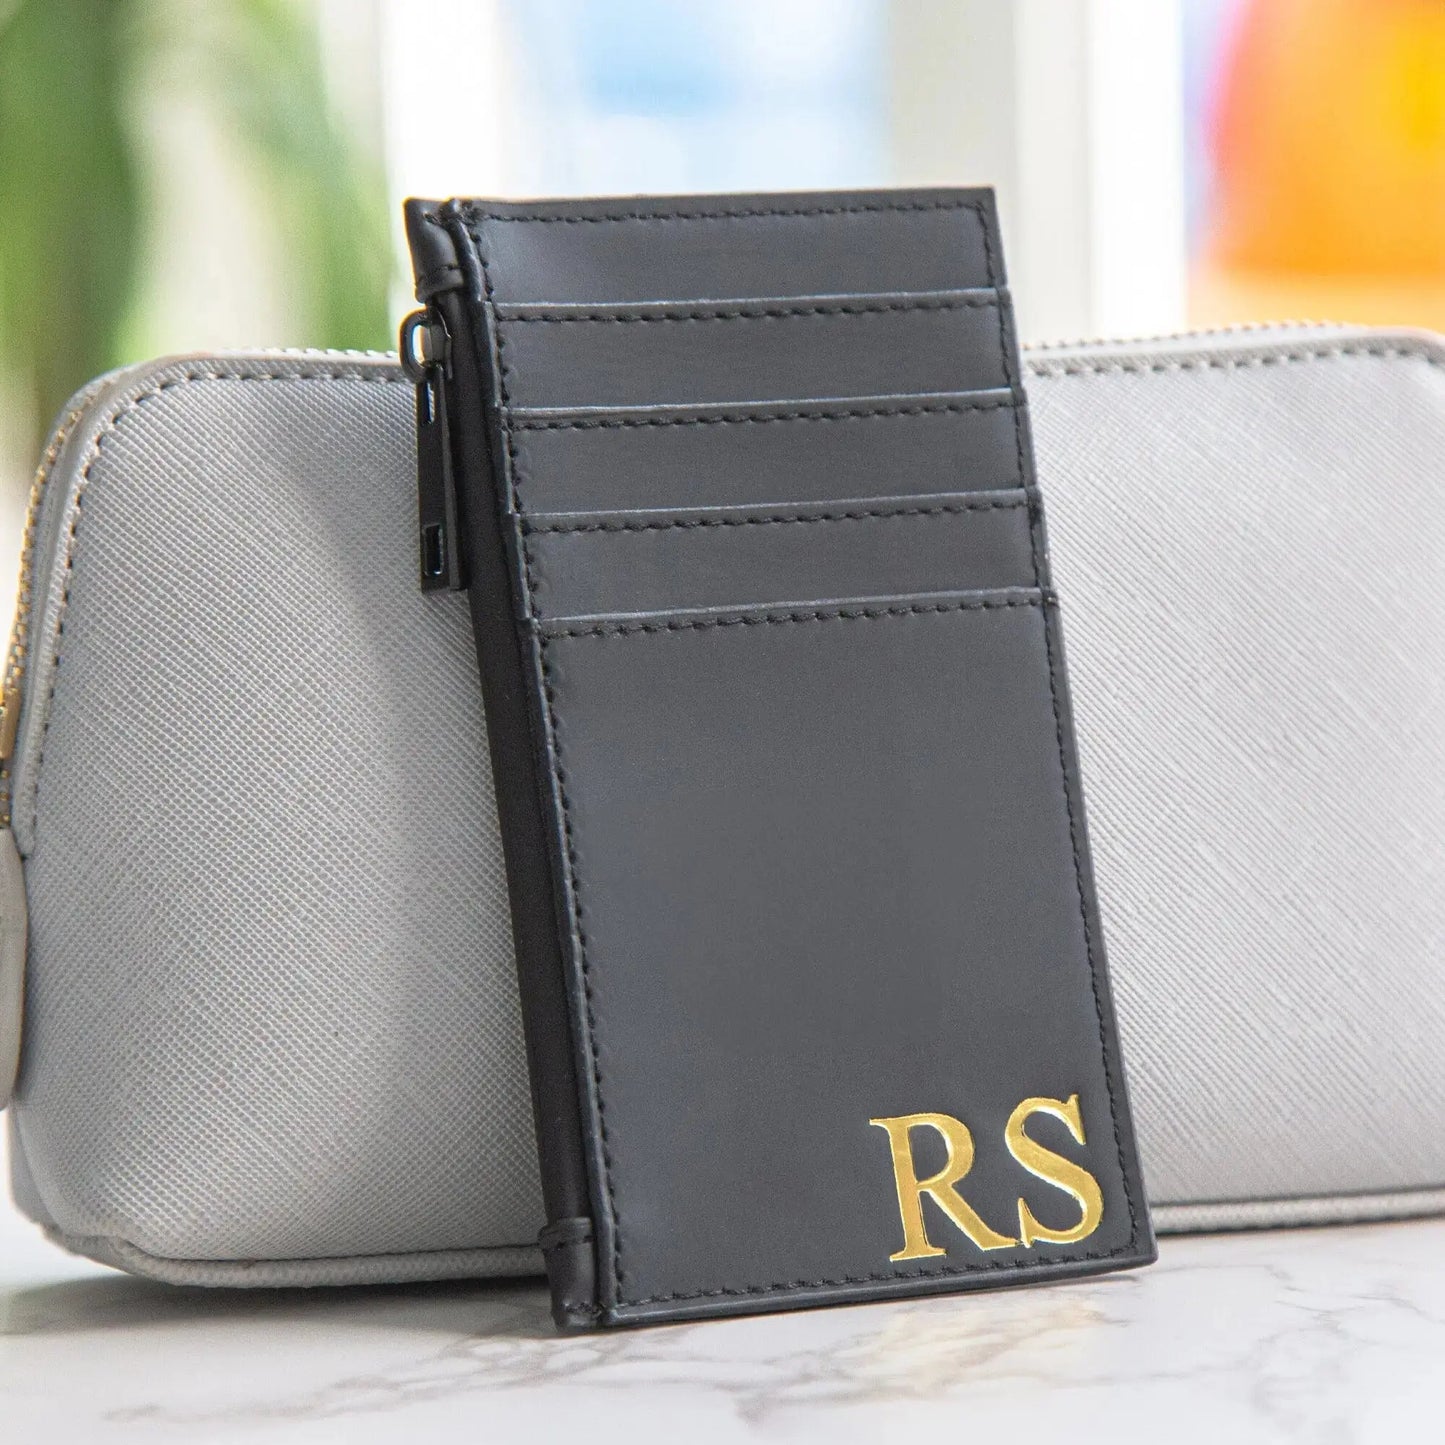 Personalised card holder with initials